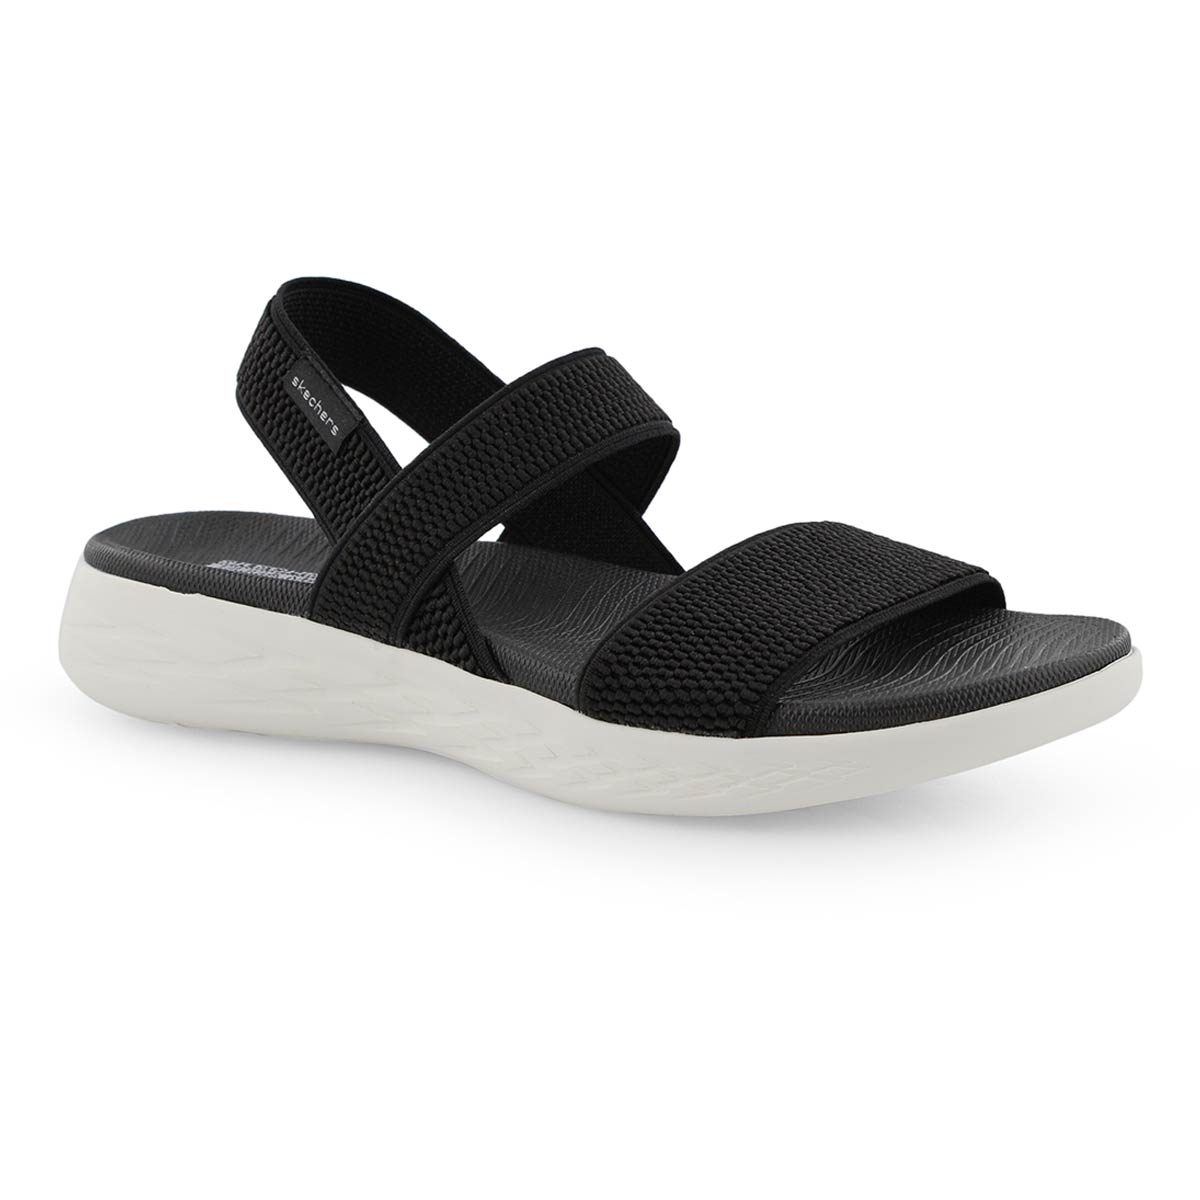 skechers on the go sandals 600